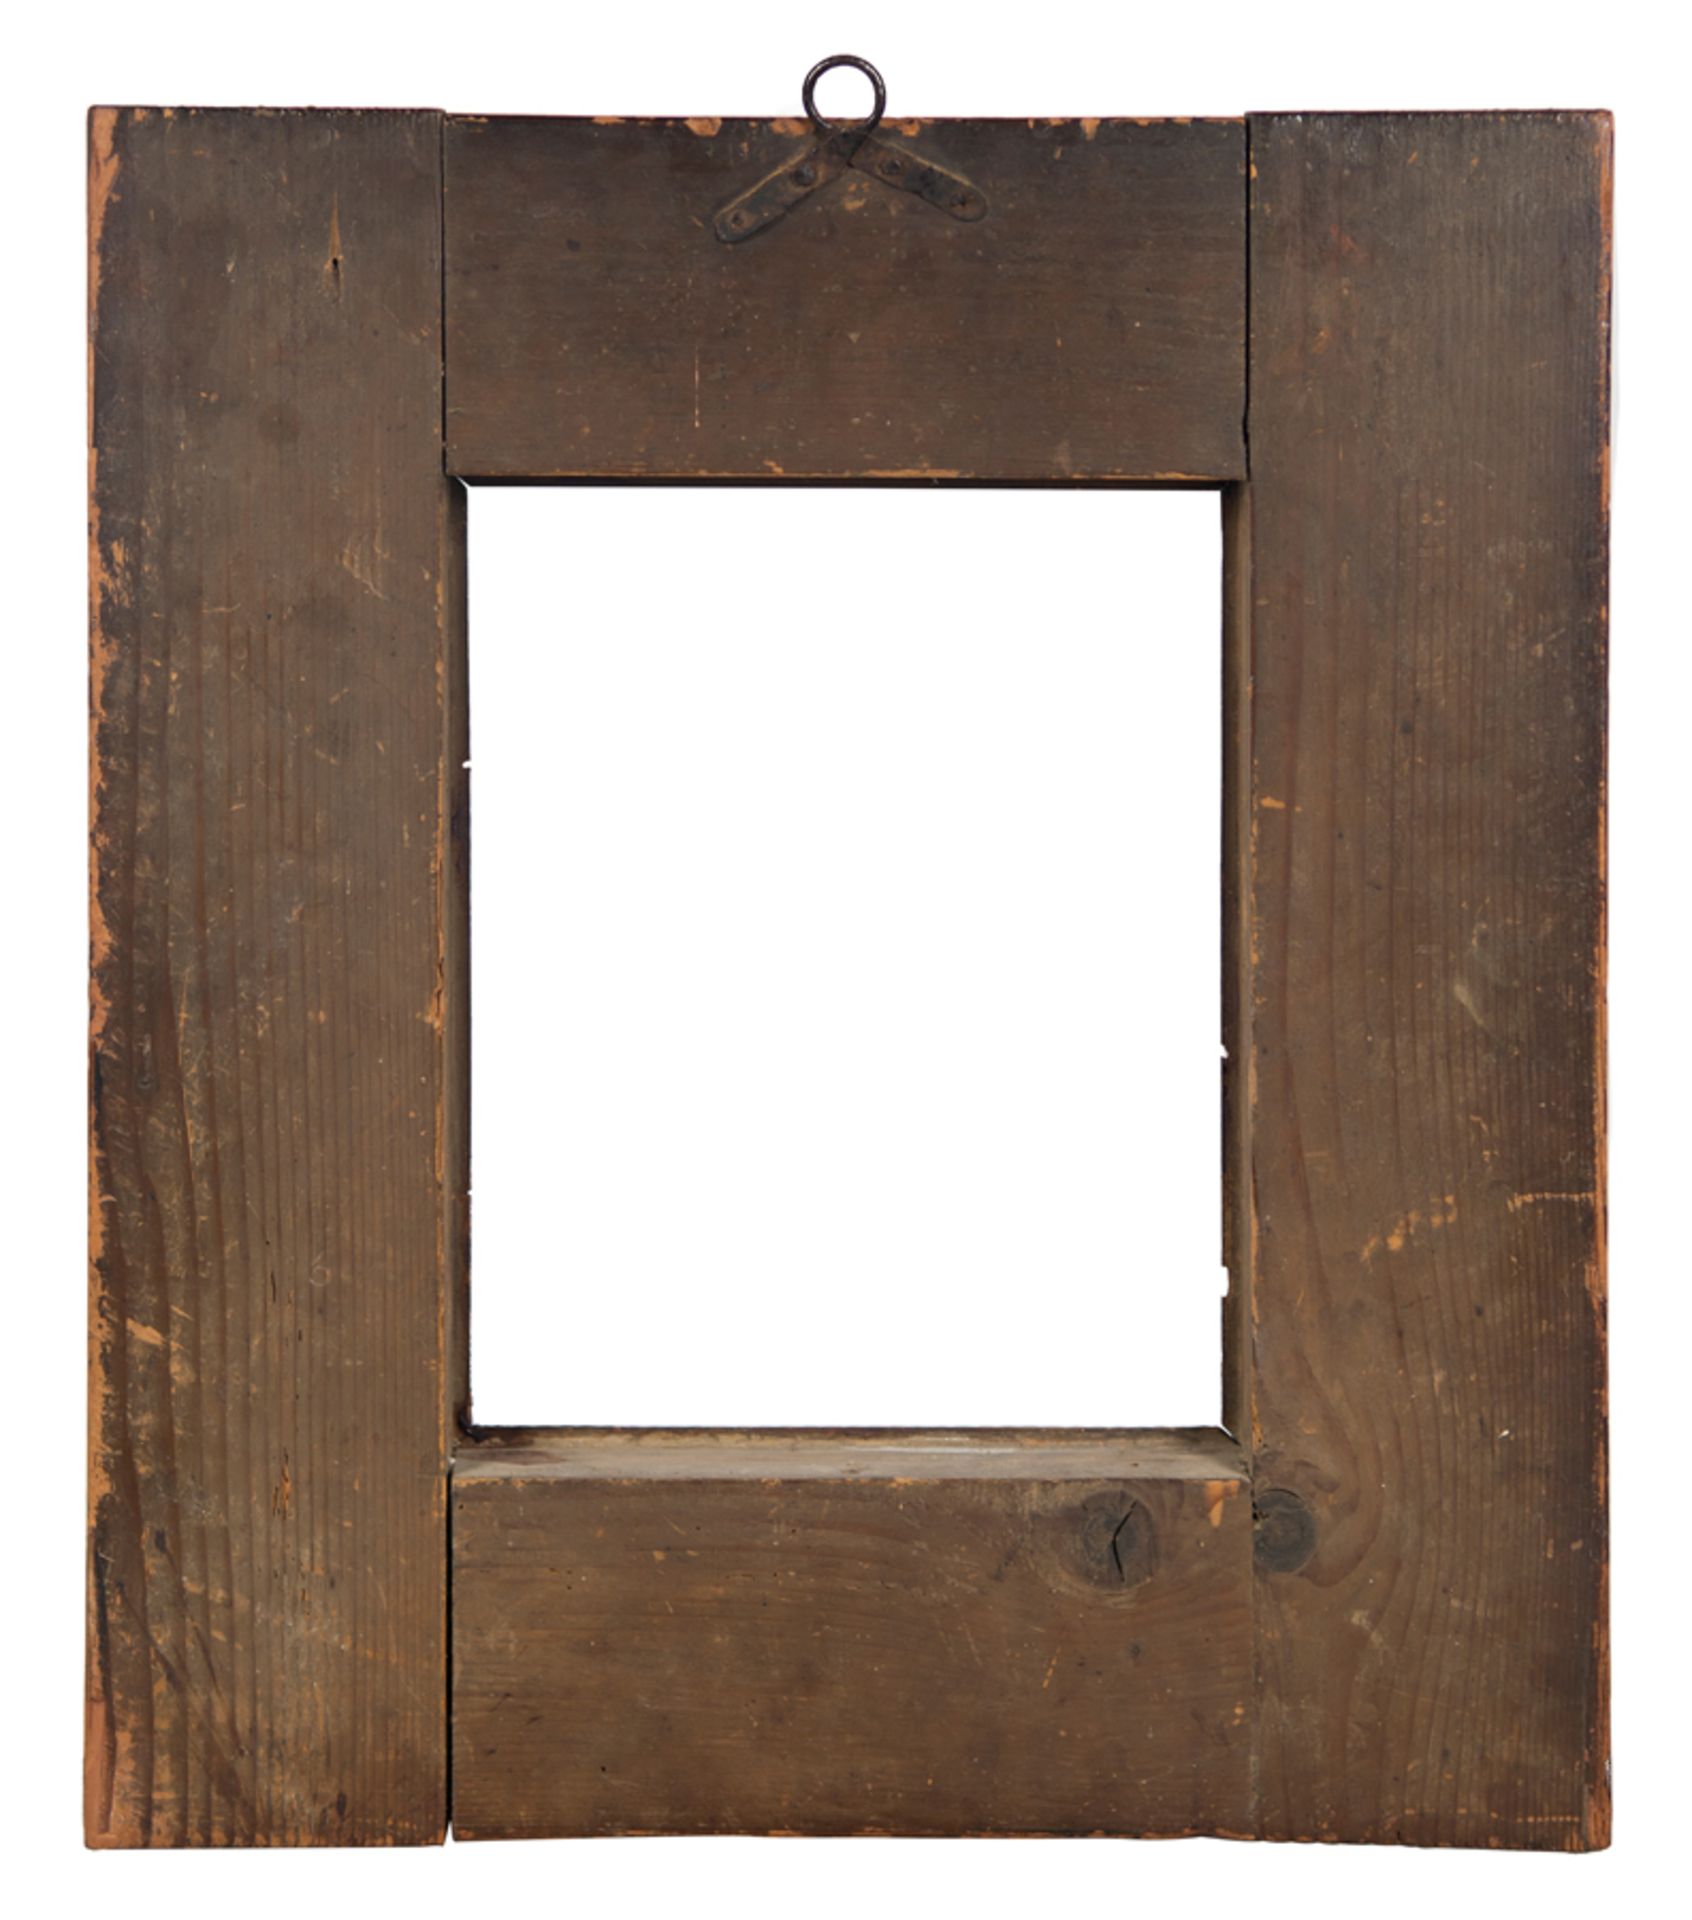 Carved wooden frame. Netherlandish work. 17th - 18th century. - Image 3 of 3